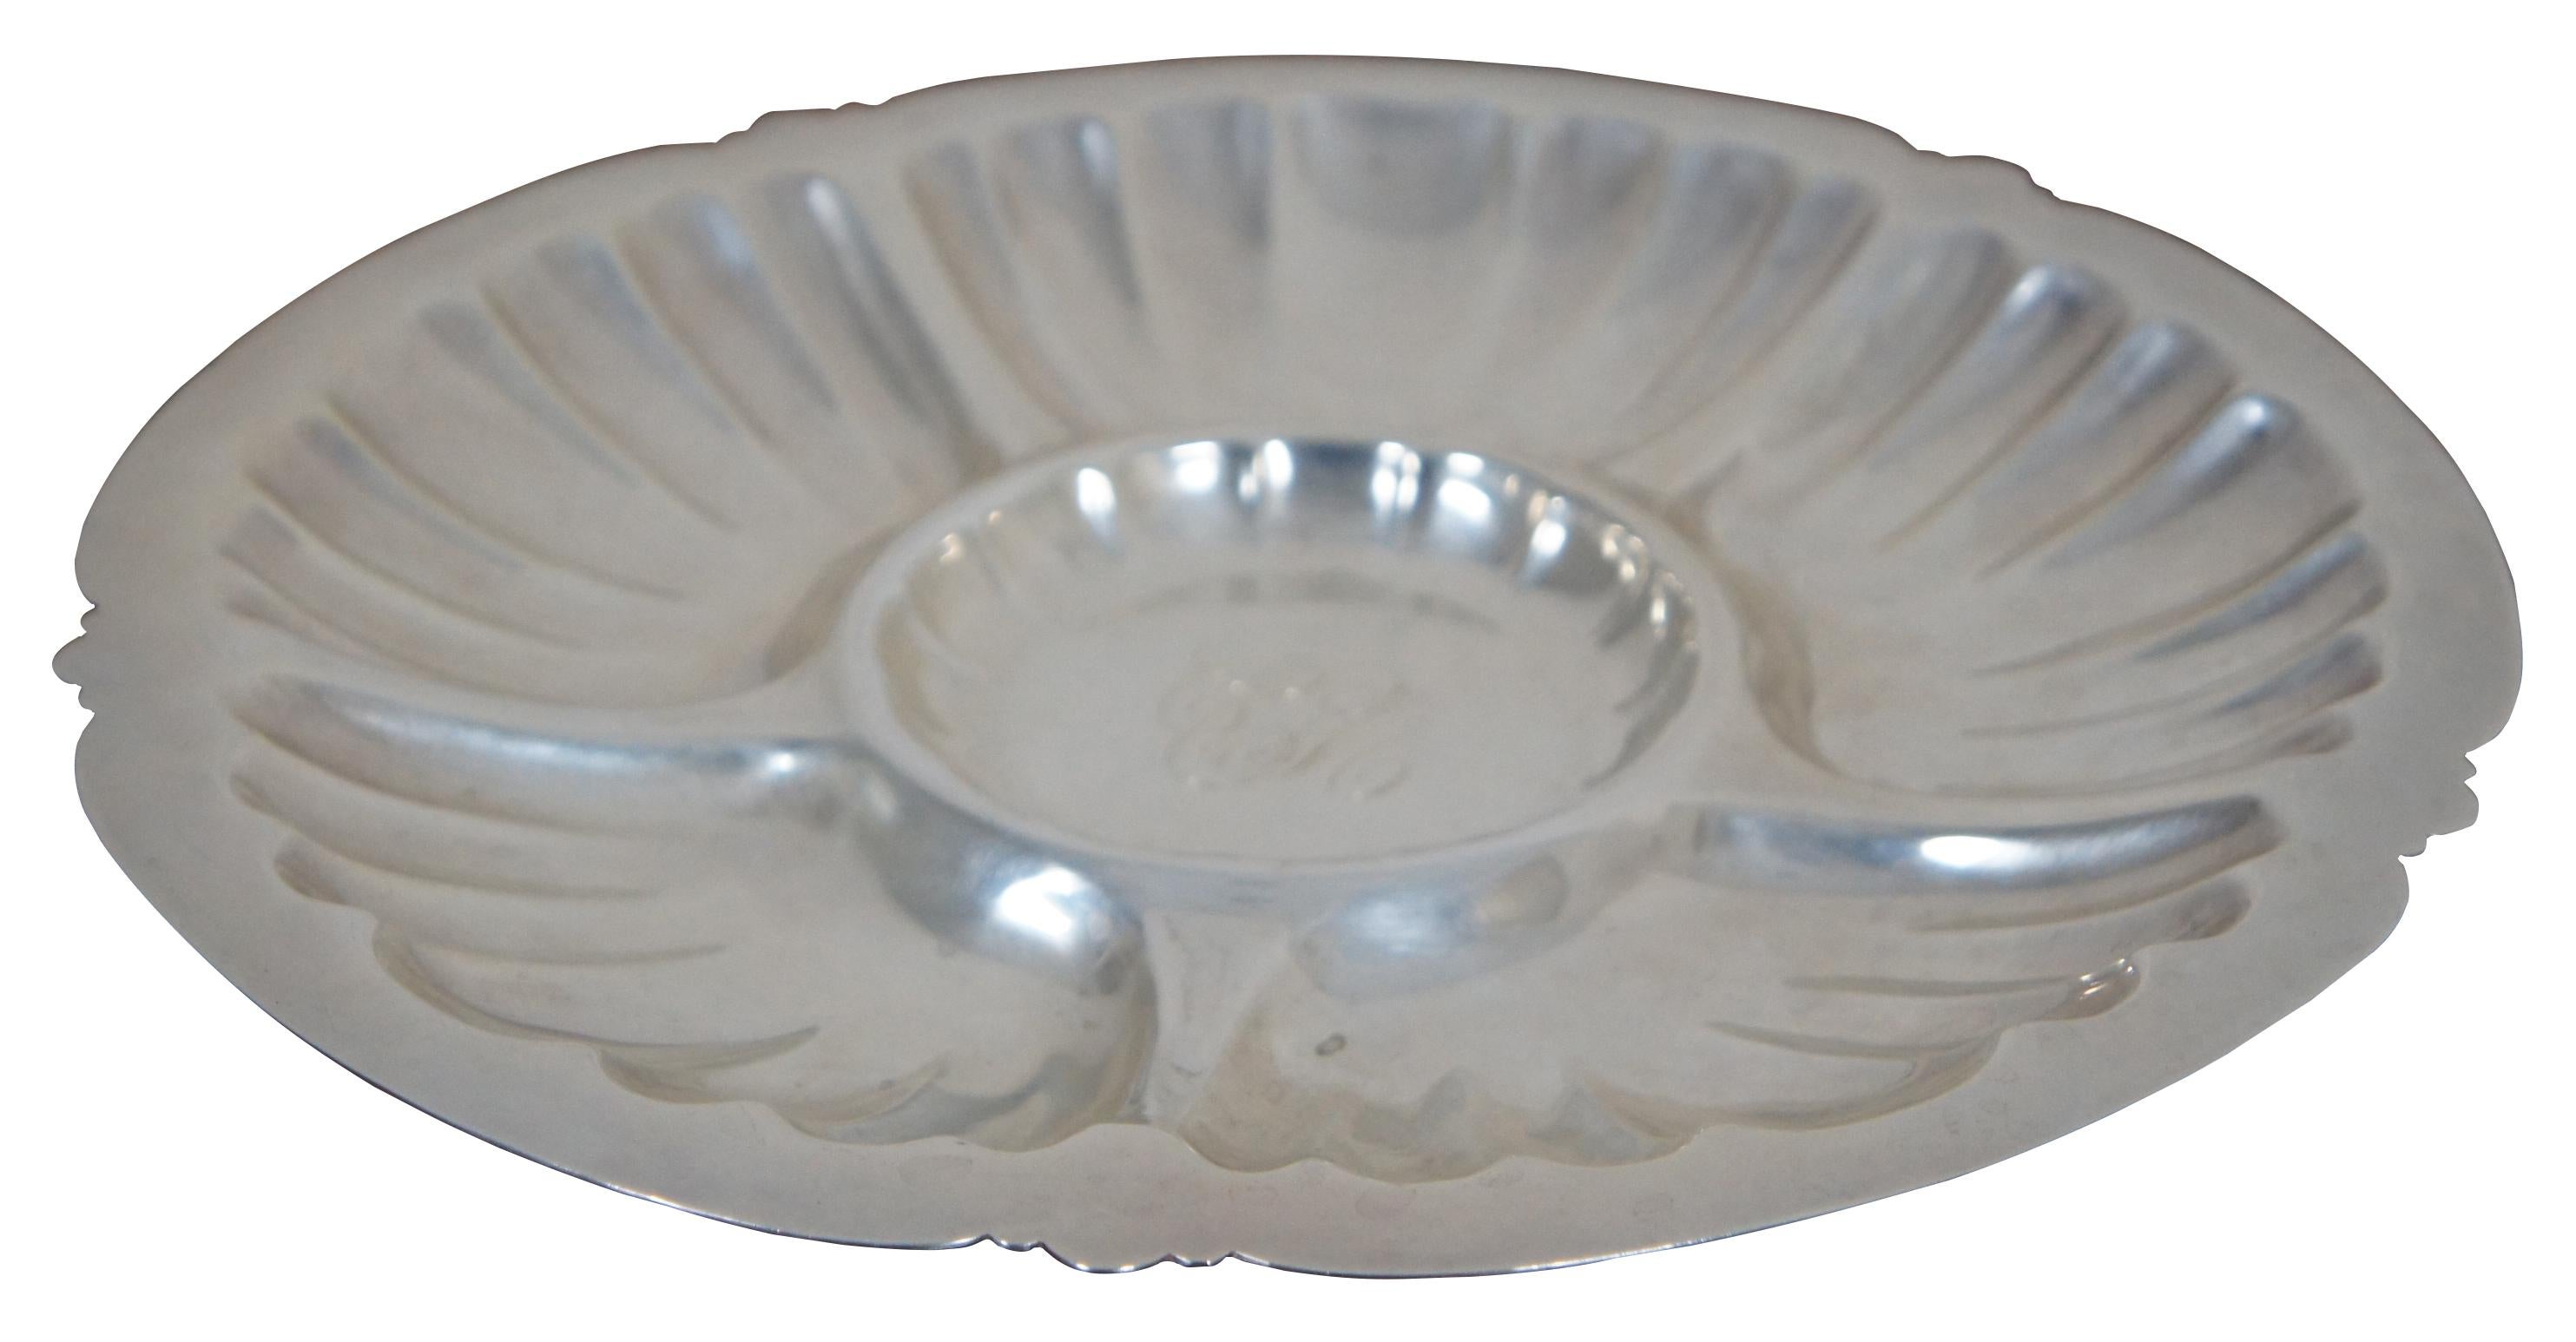 Vintage Frank M. Whiting number C607 six sectioned / divided shrimp, appetiser, cocktail serving plate or tray with round scallop form and shell design, engraved in the center with the initials CMC. “North Attleboro, MA - Origin as Holbrook Whiting